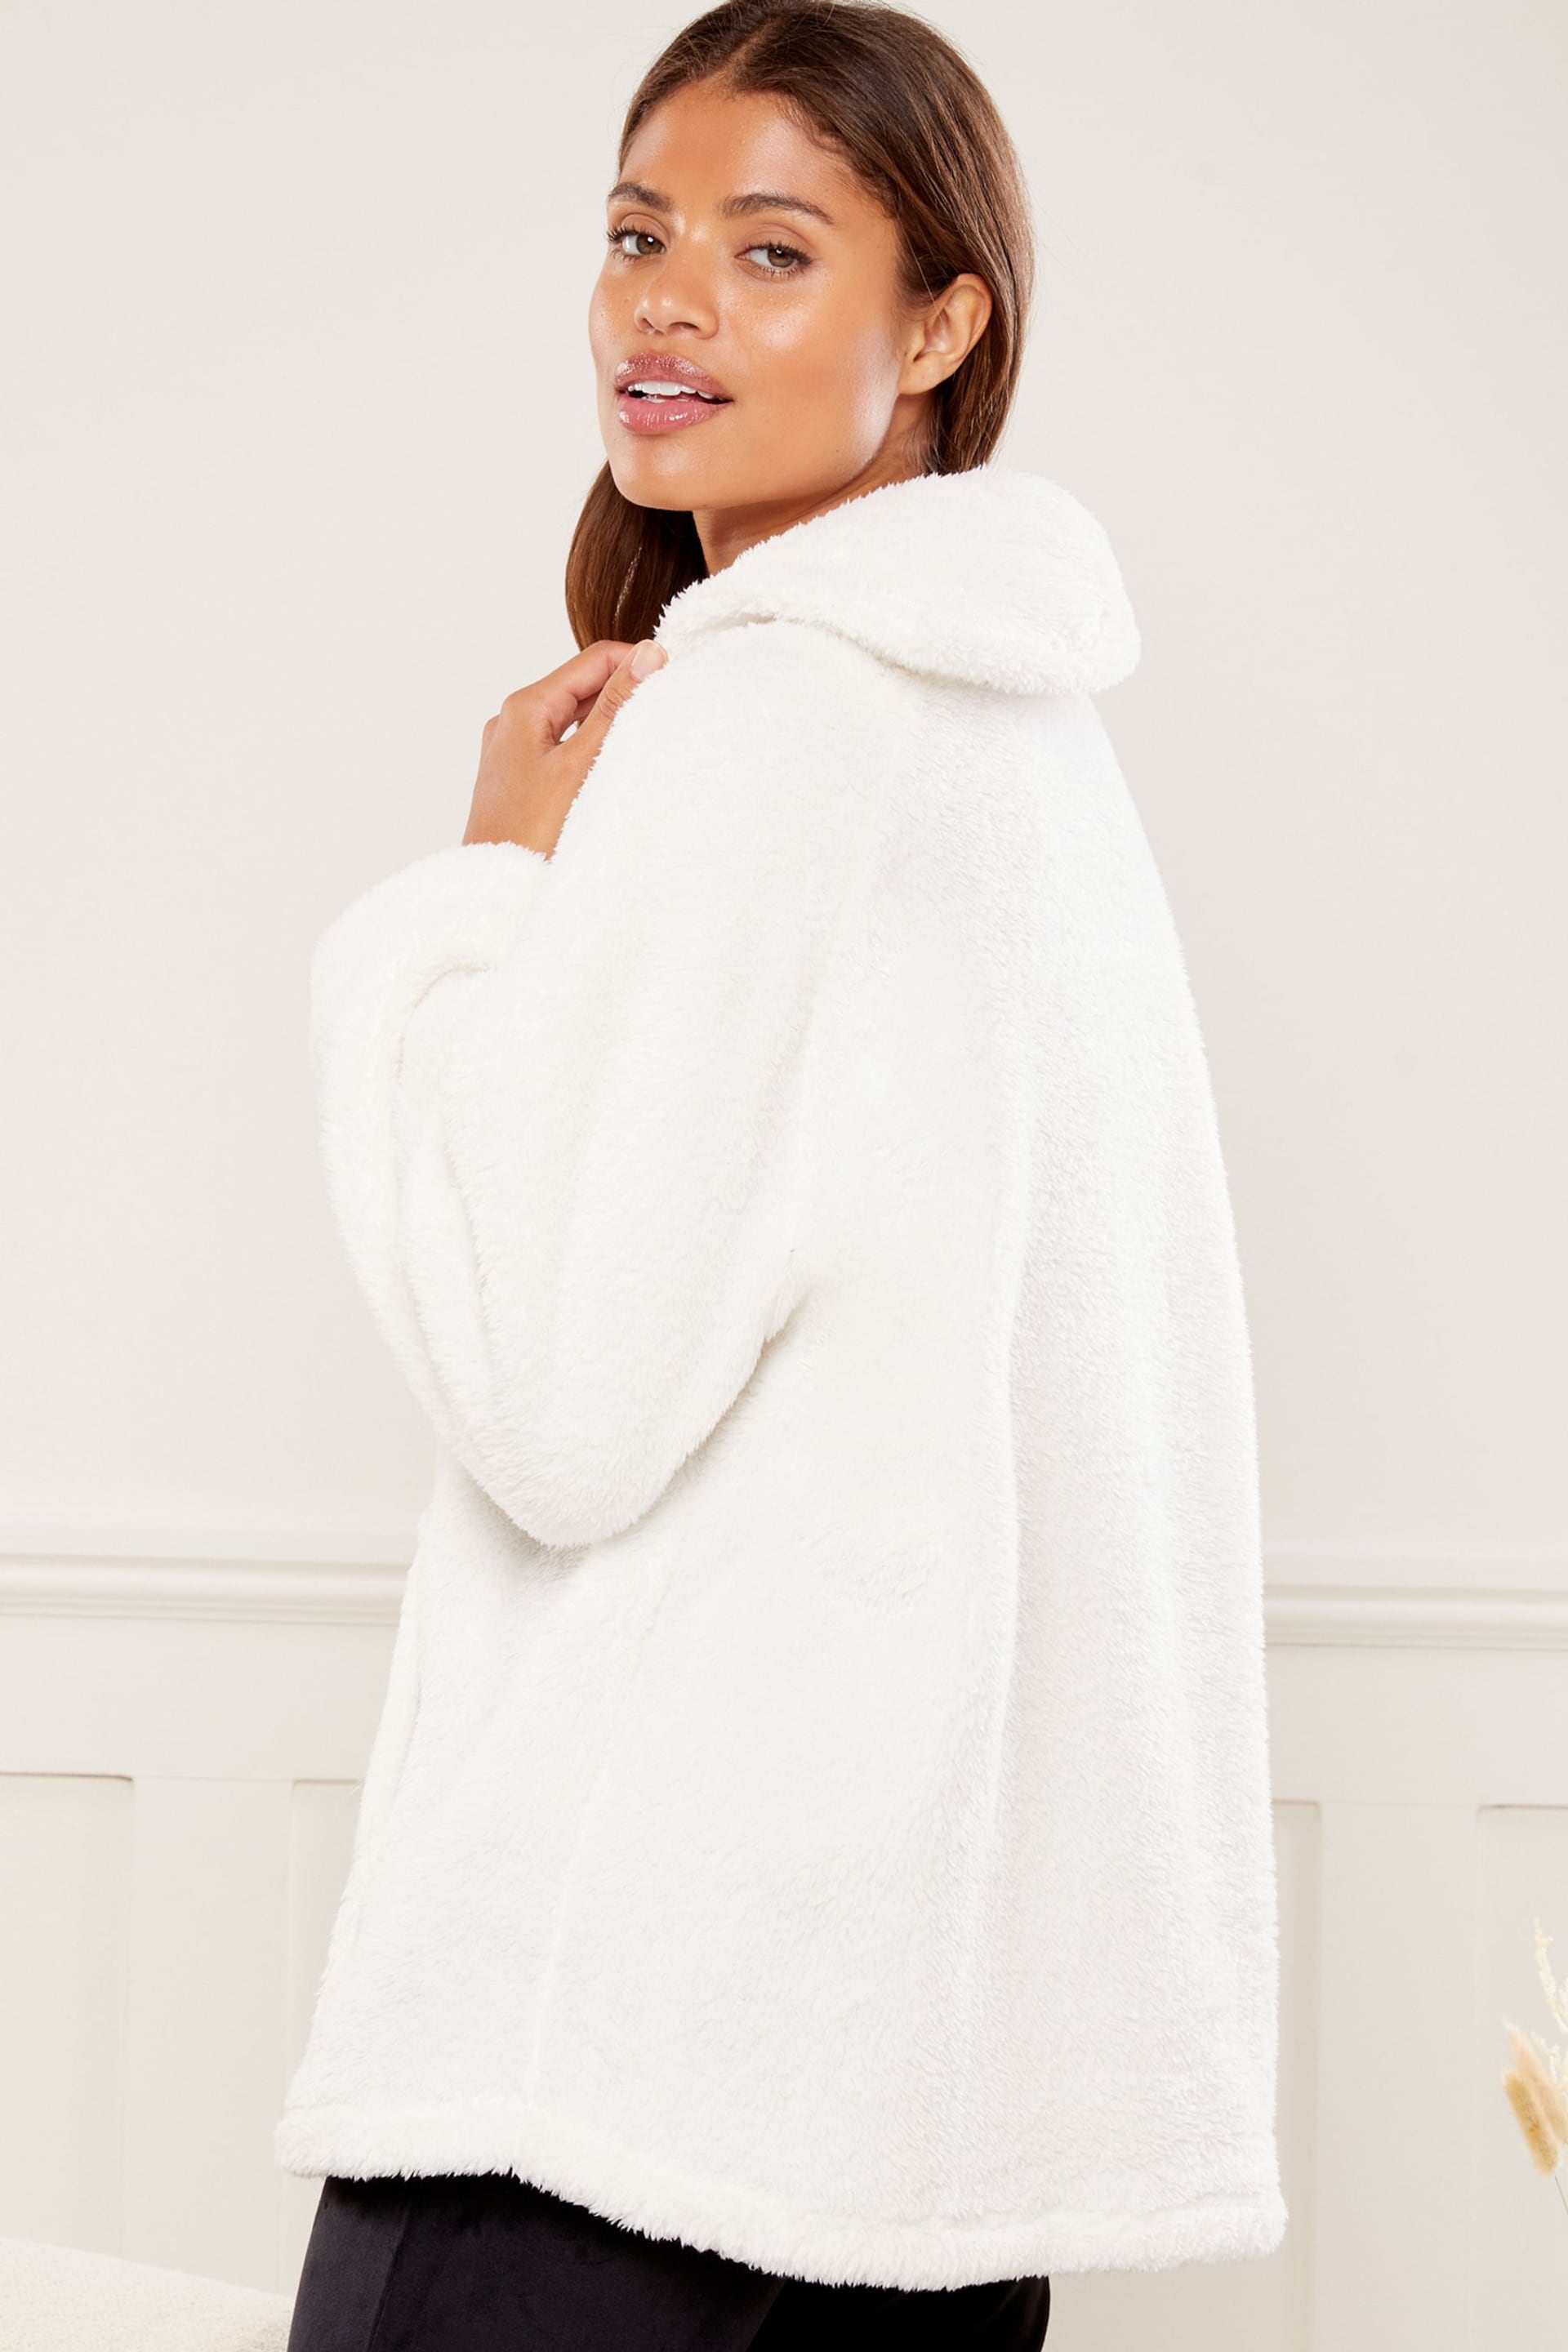 Lipsy Ivory White Supersoft Cosy Teddy Borg Envelope Lounge Top - Image 2 of 4